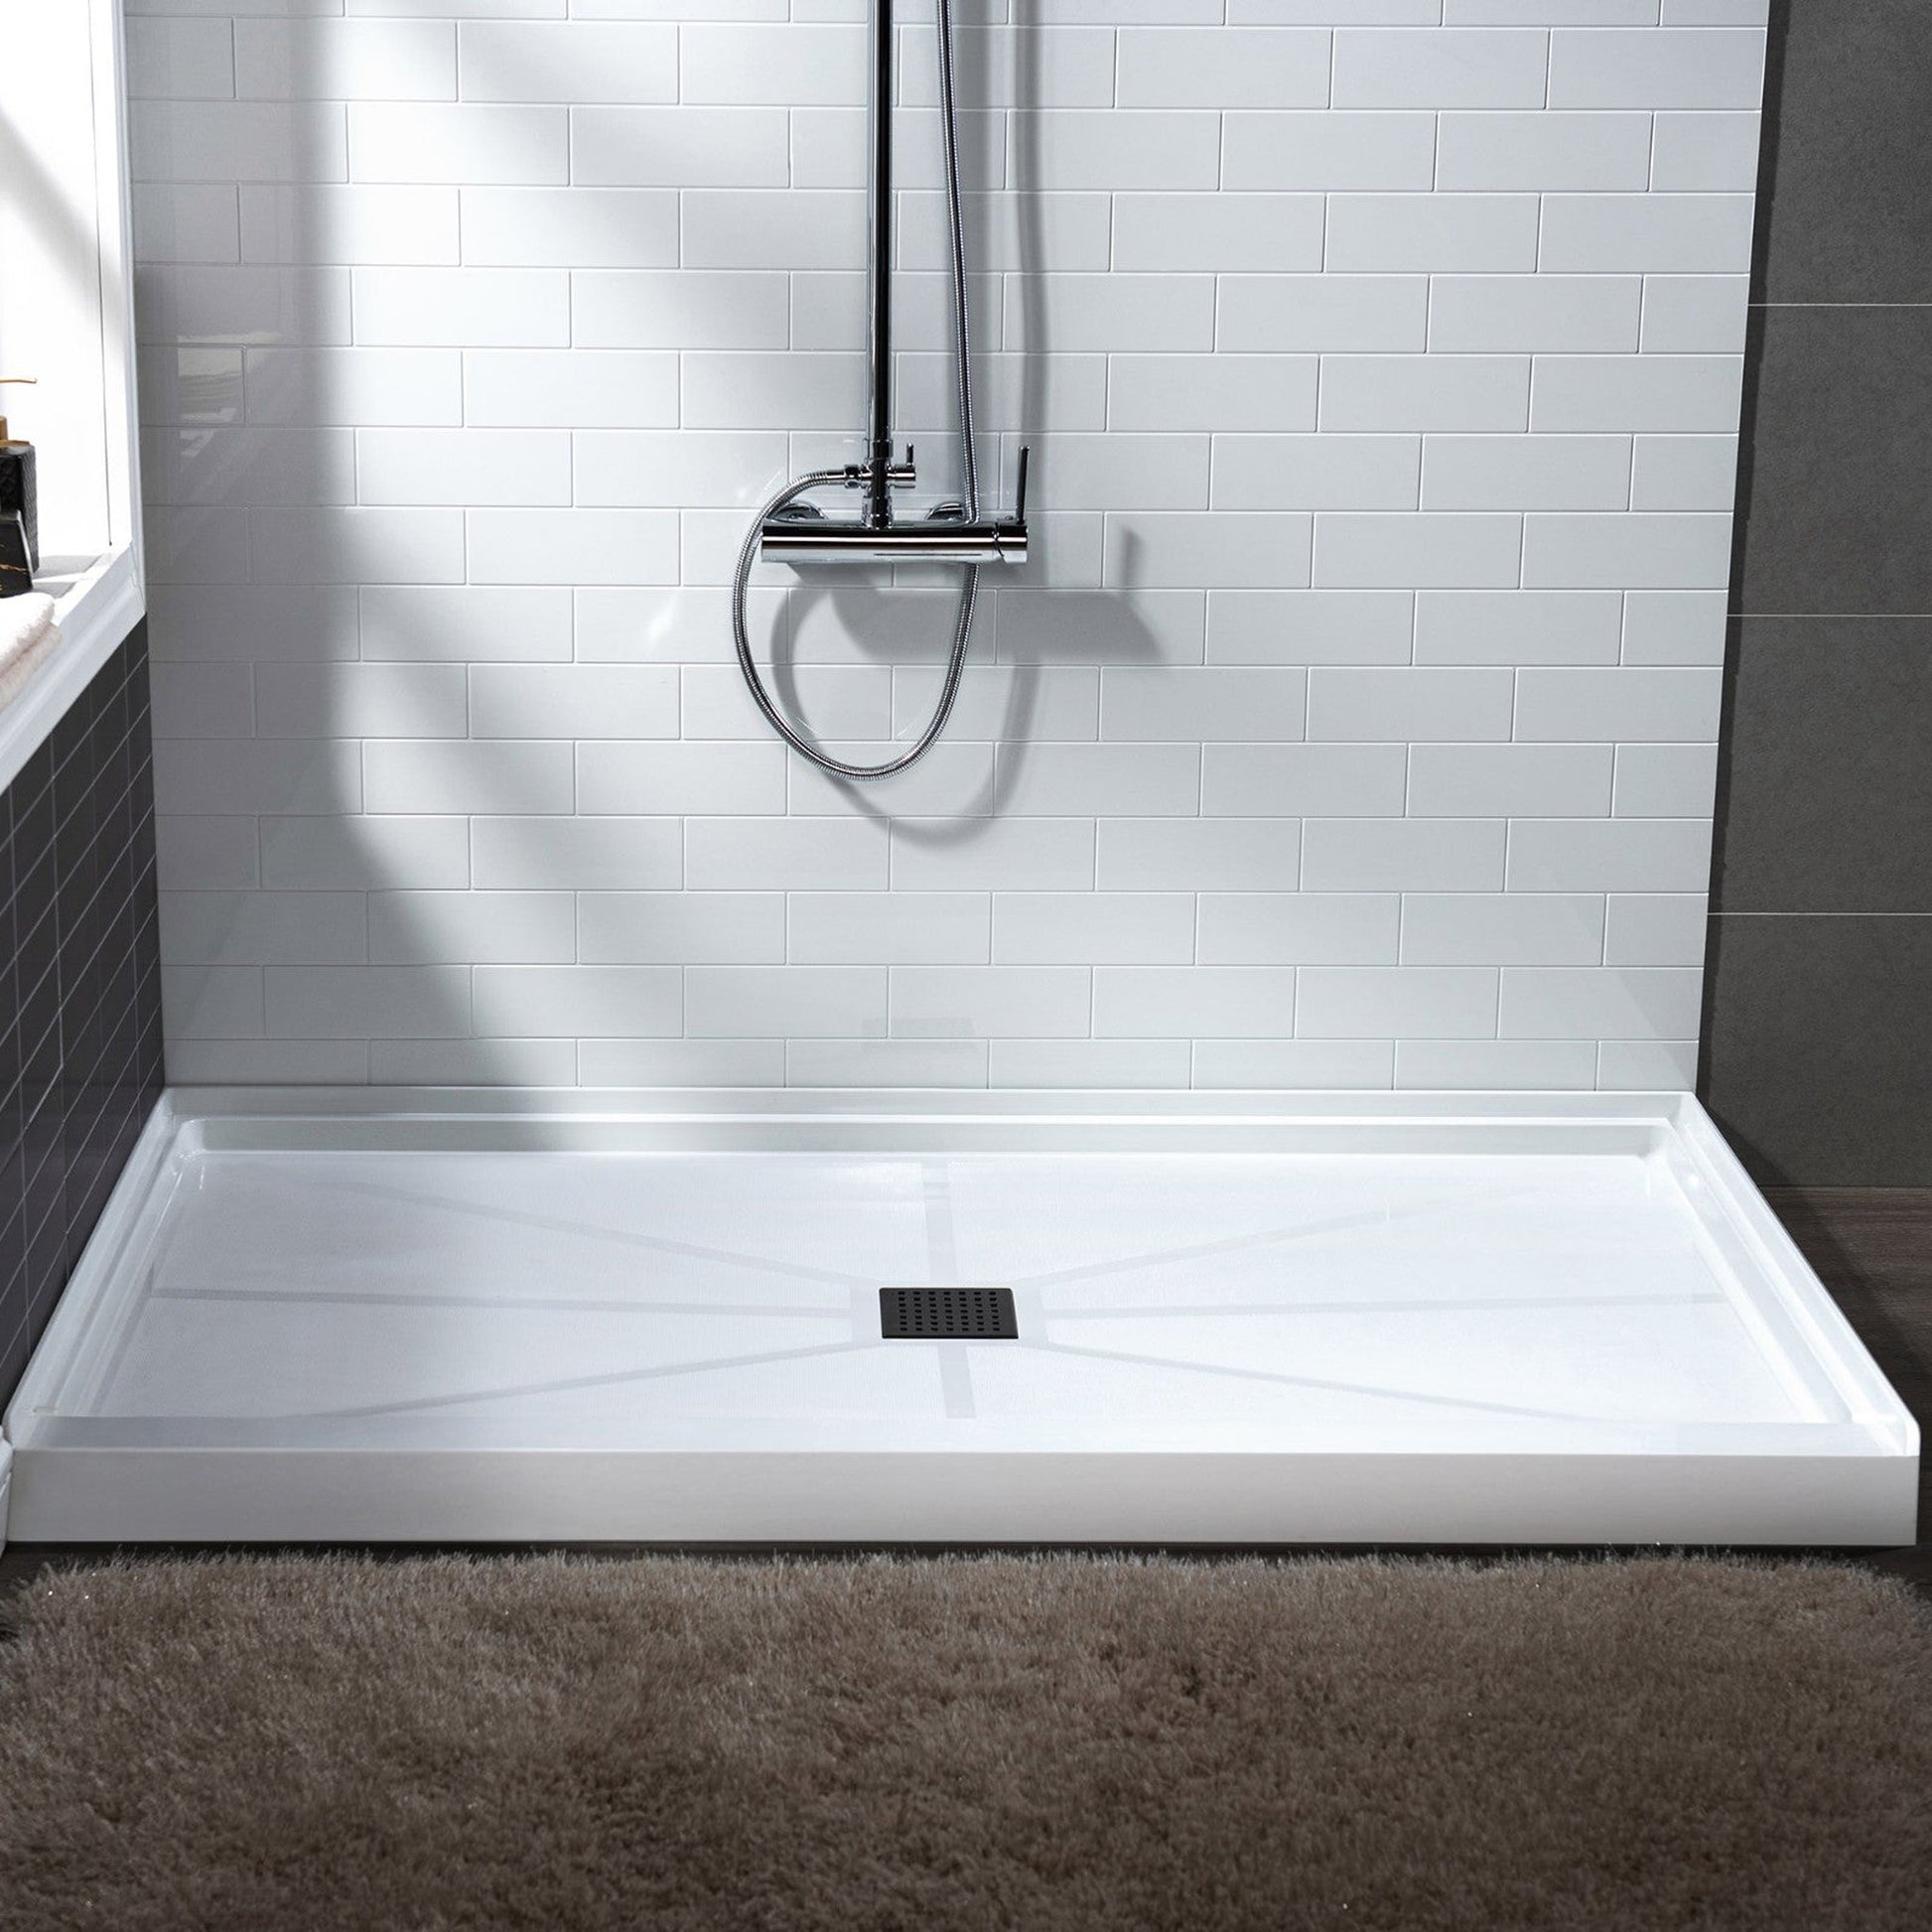 WoodBridge 48" x 36" White Solid Surface Shower Base Center Drain Location With Matte Black Trench Drain Cover